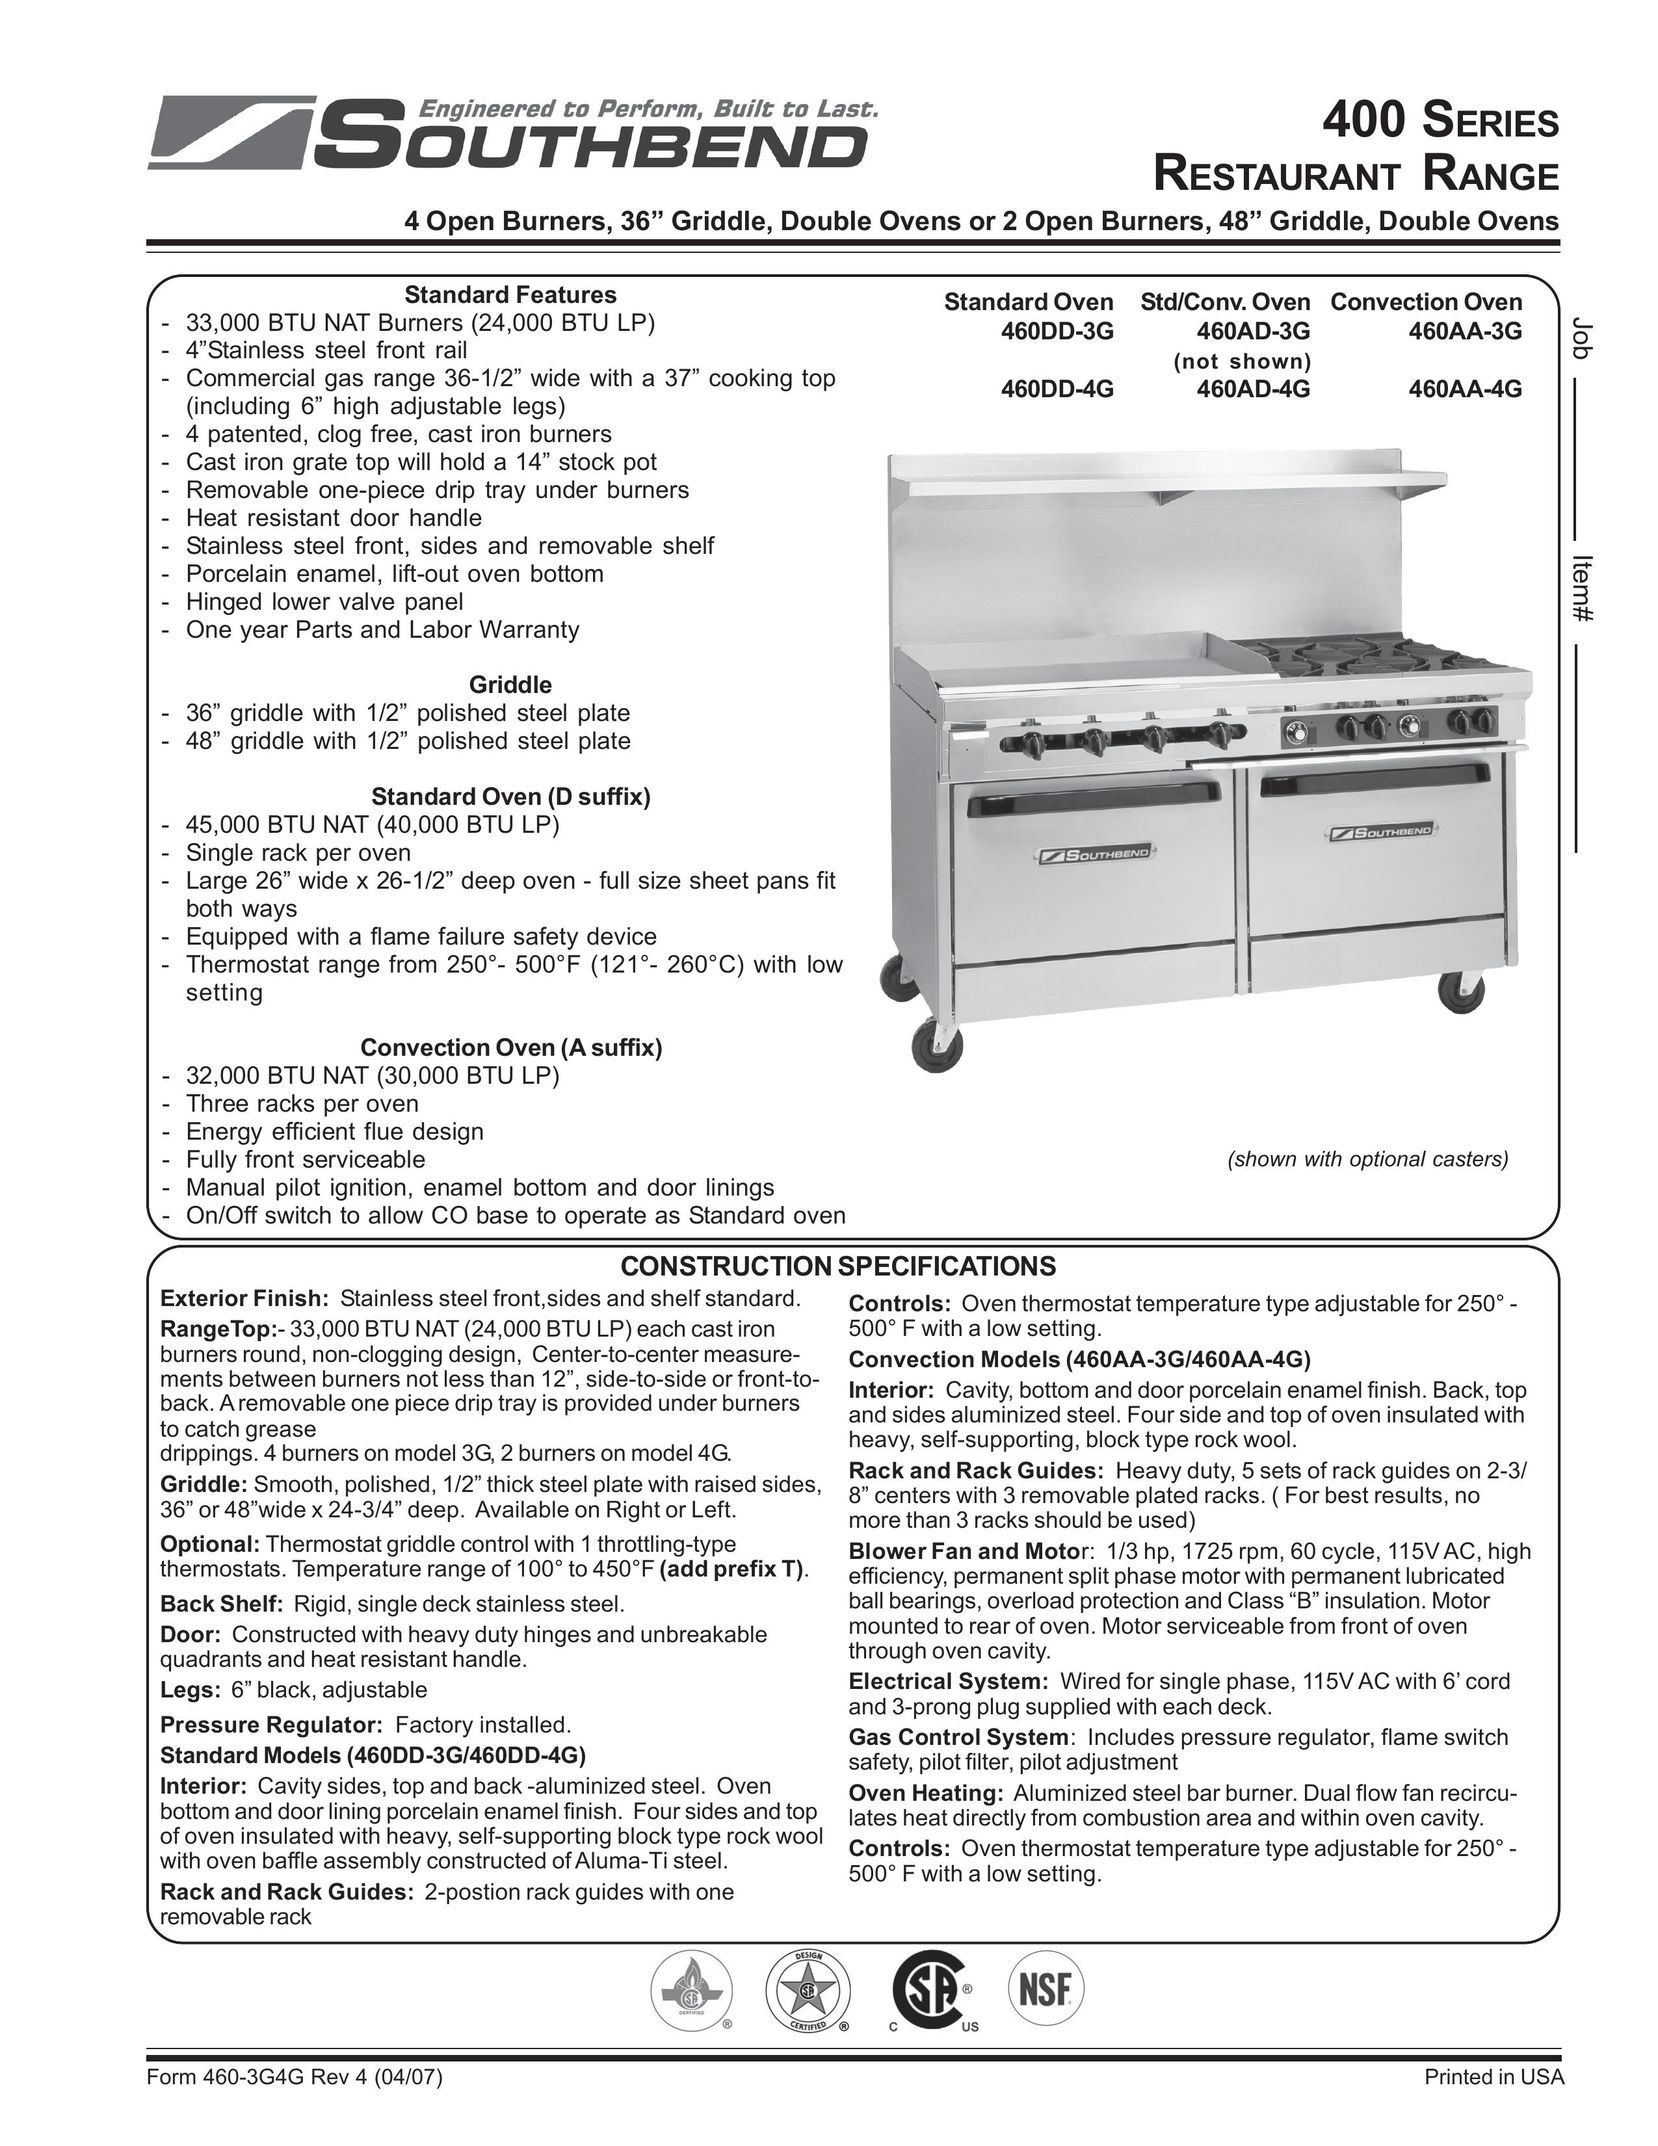 Southbend 460AD-3G Convection Oven User Manual